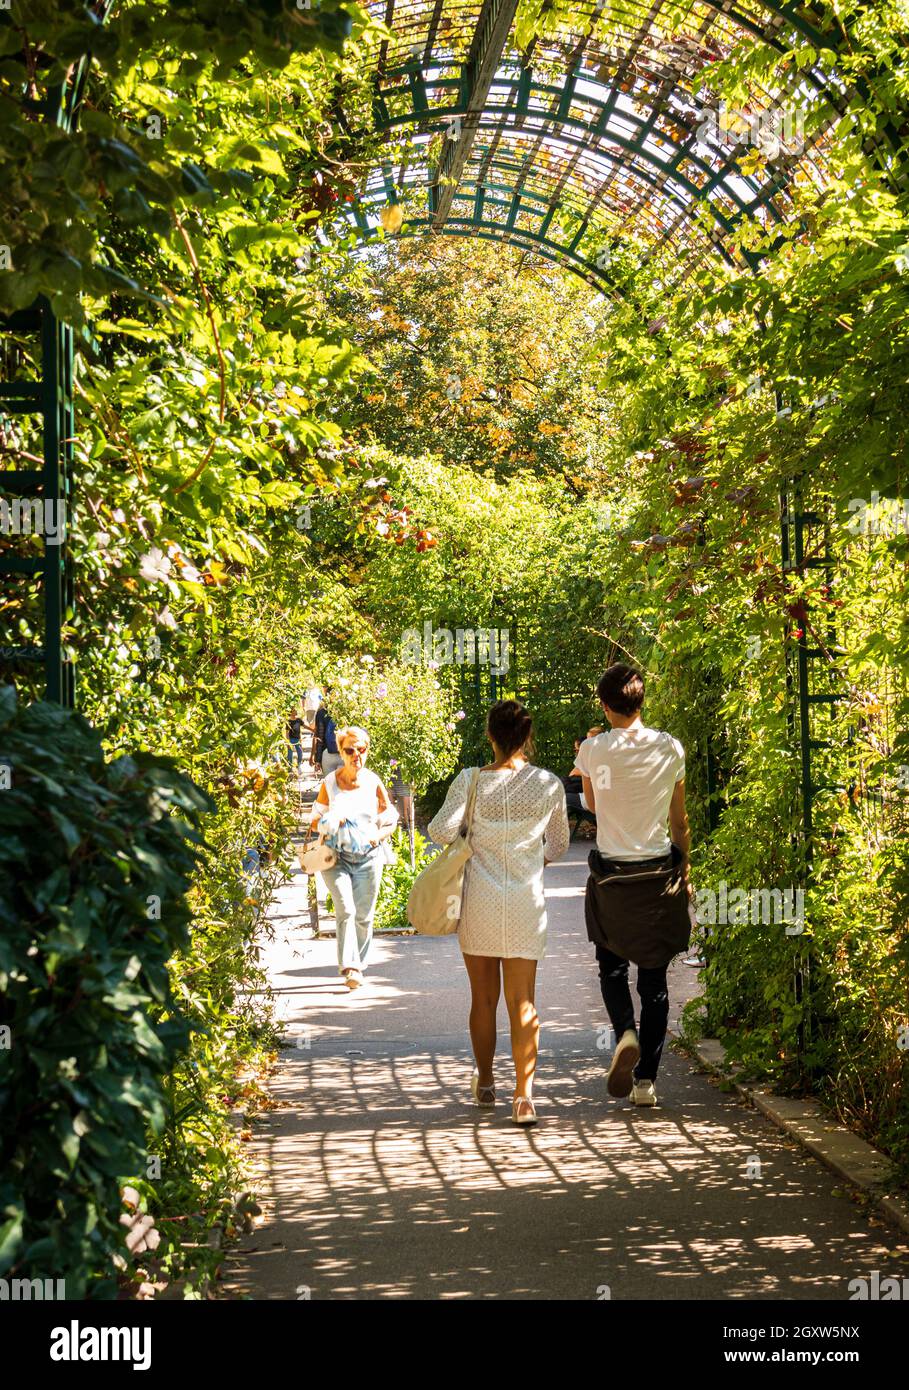 People walking on the Promenade Plantee in the 12th Arrondissement in Paris, France.  Sunny day, greenery, pleasant ambience. Stock Photo